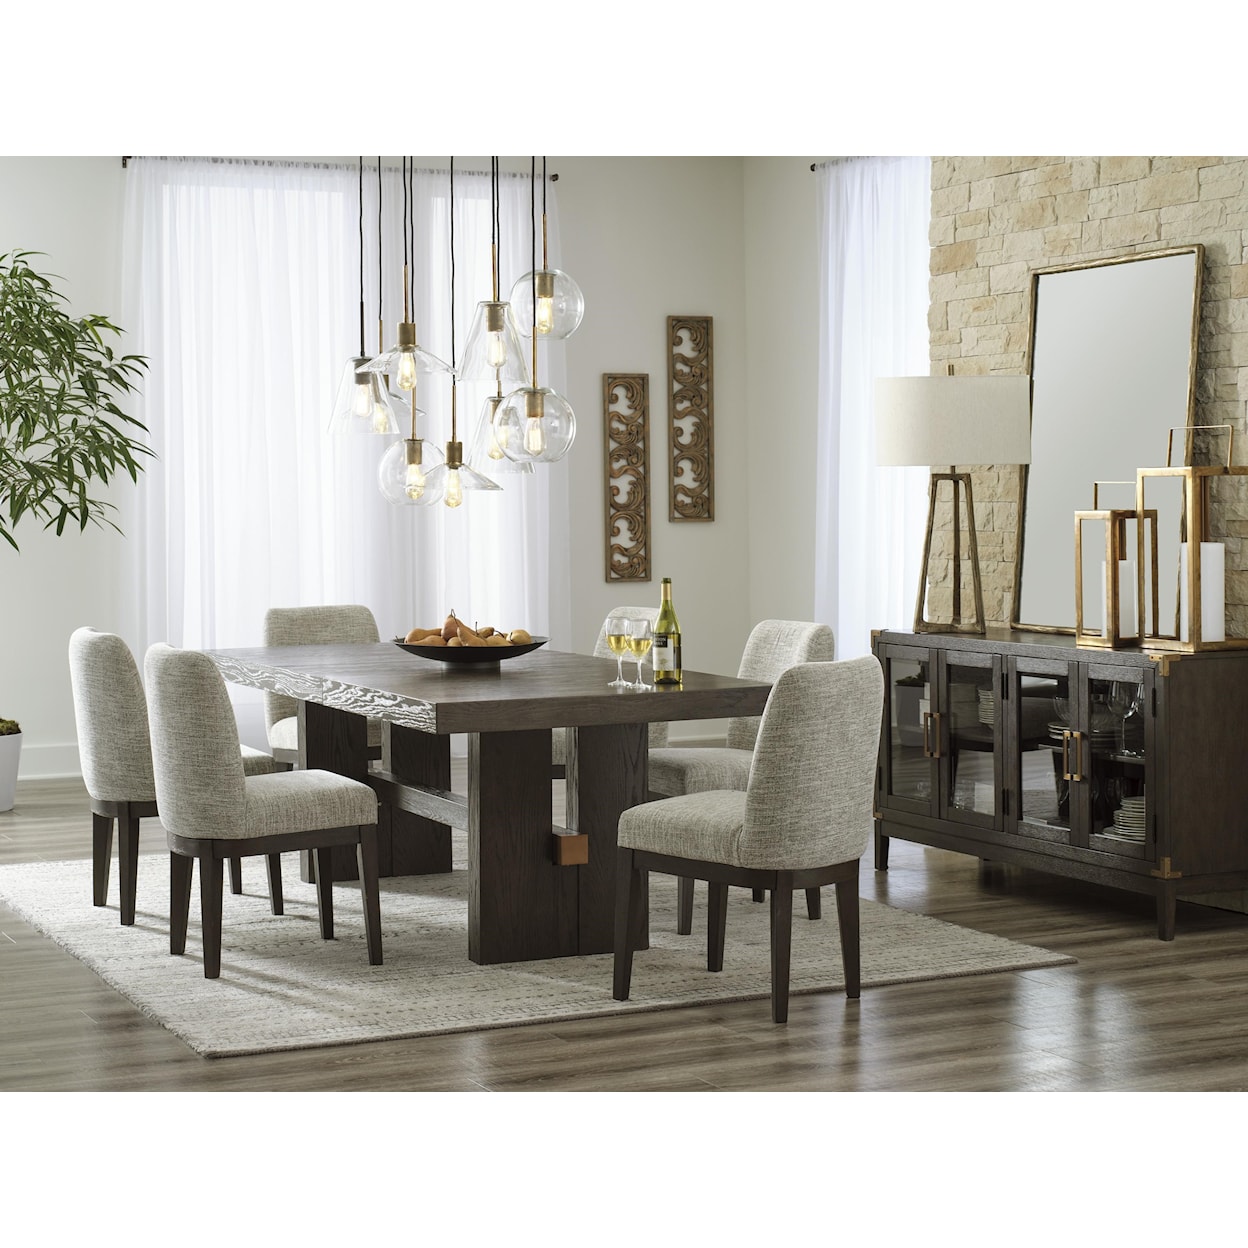 Signature Design by Ashley Burkaus TABLE & 6 SIDE CHAIRS